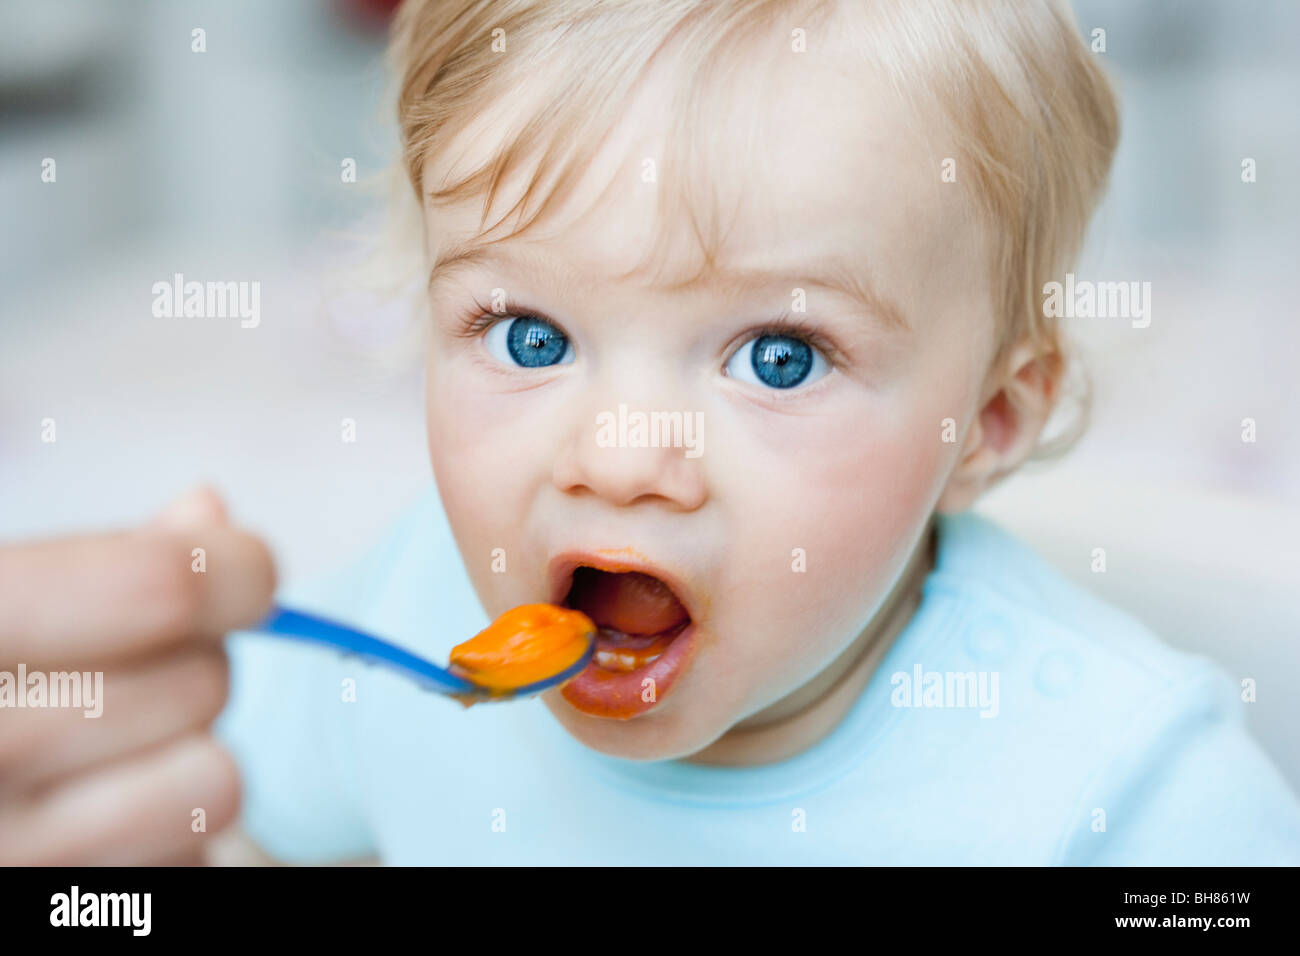 baby being fed looking at viewer Stock Photo